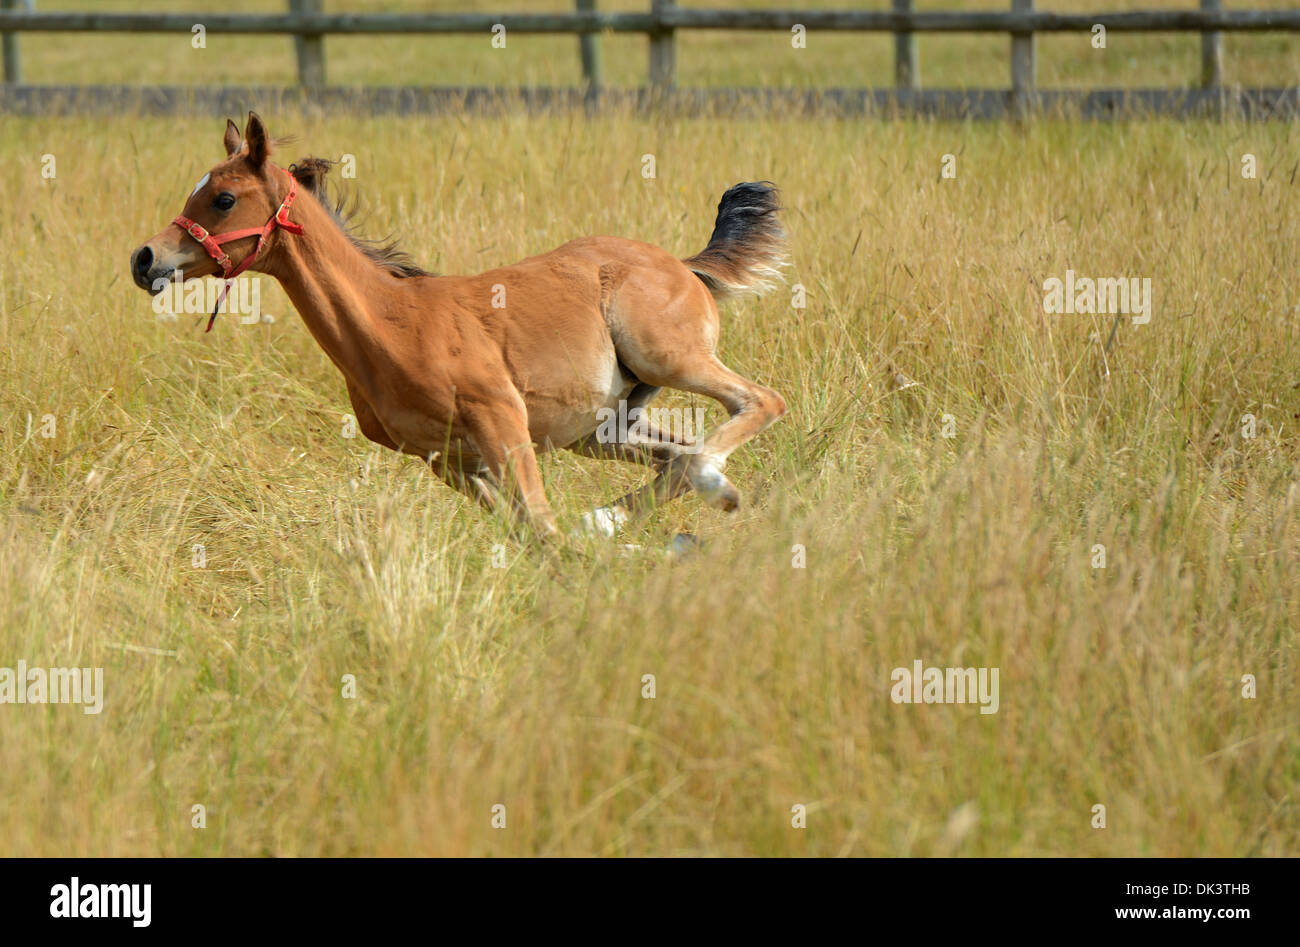 Chestnut Arab foal galloping in a grassy field Stock Photo